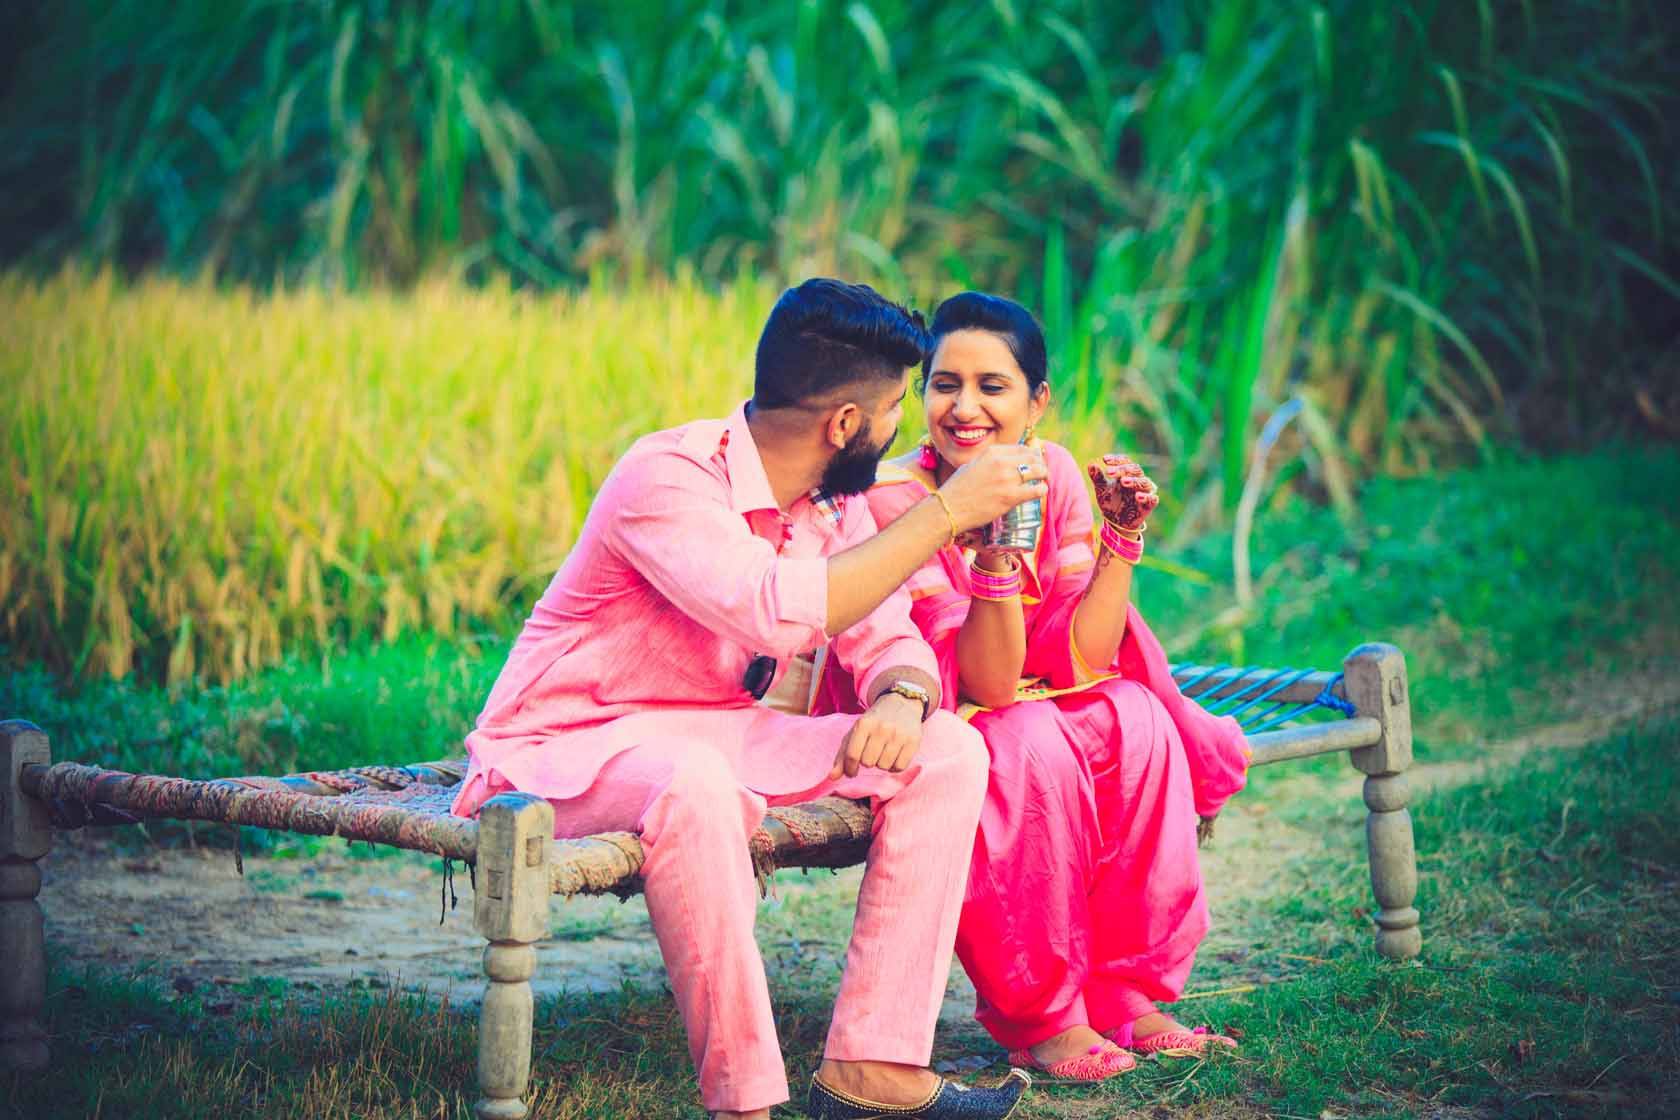 stylish couple hd wallpaper,people in nature,photograph,green,romance,pink